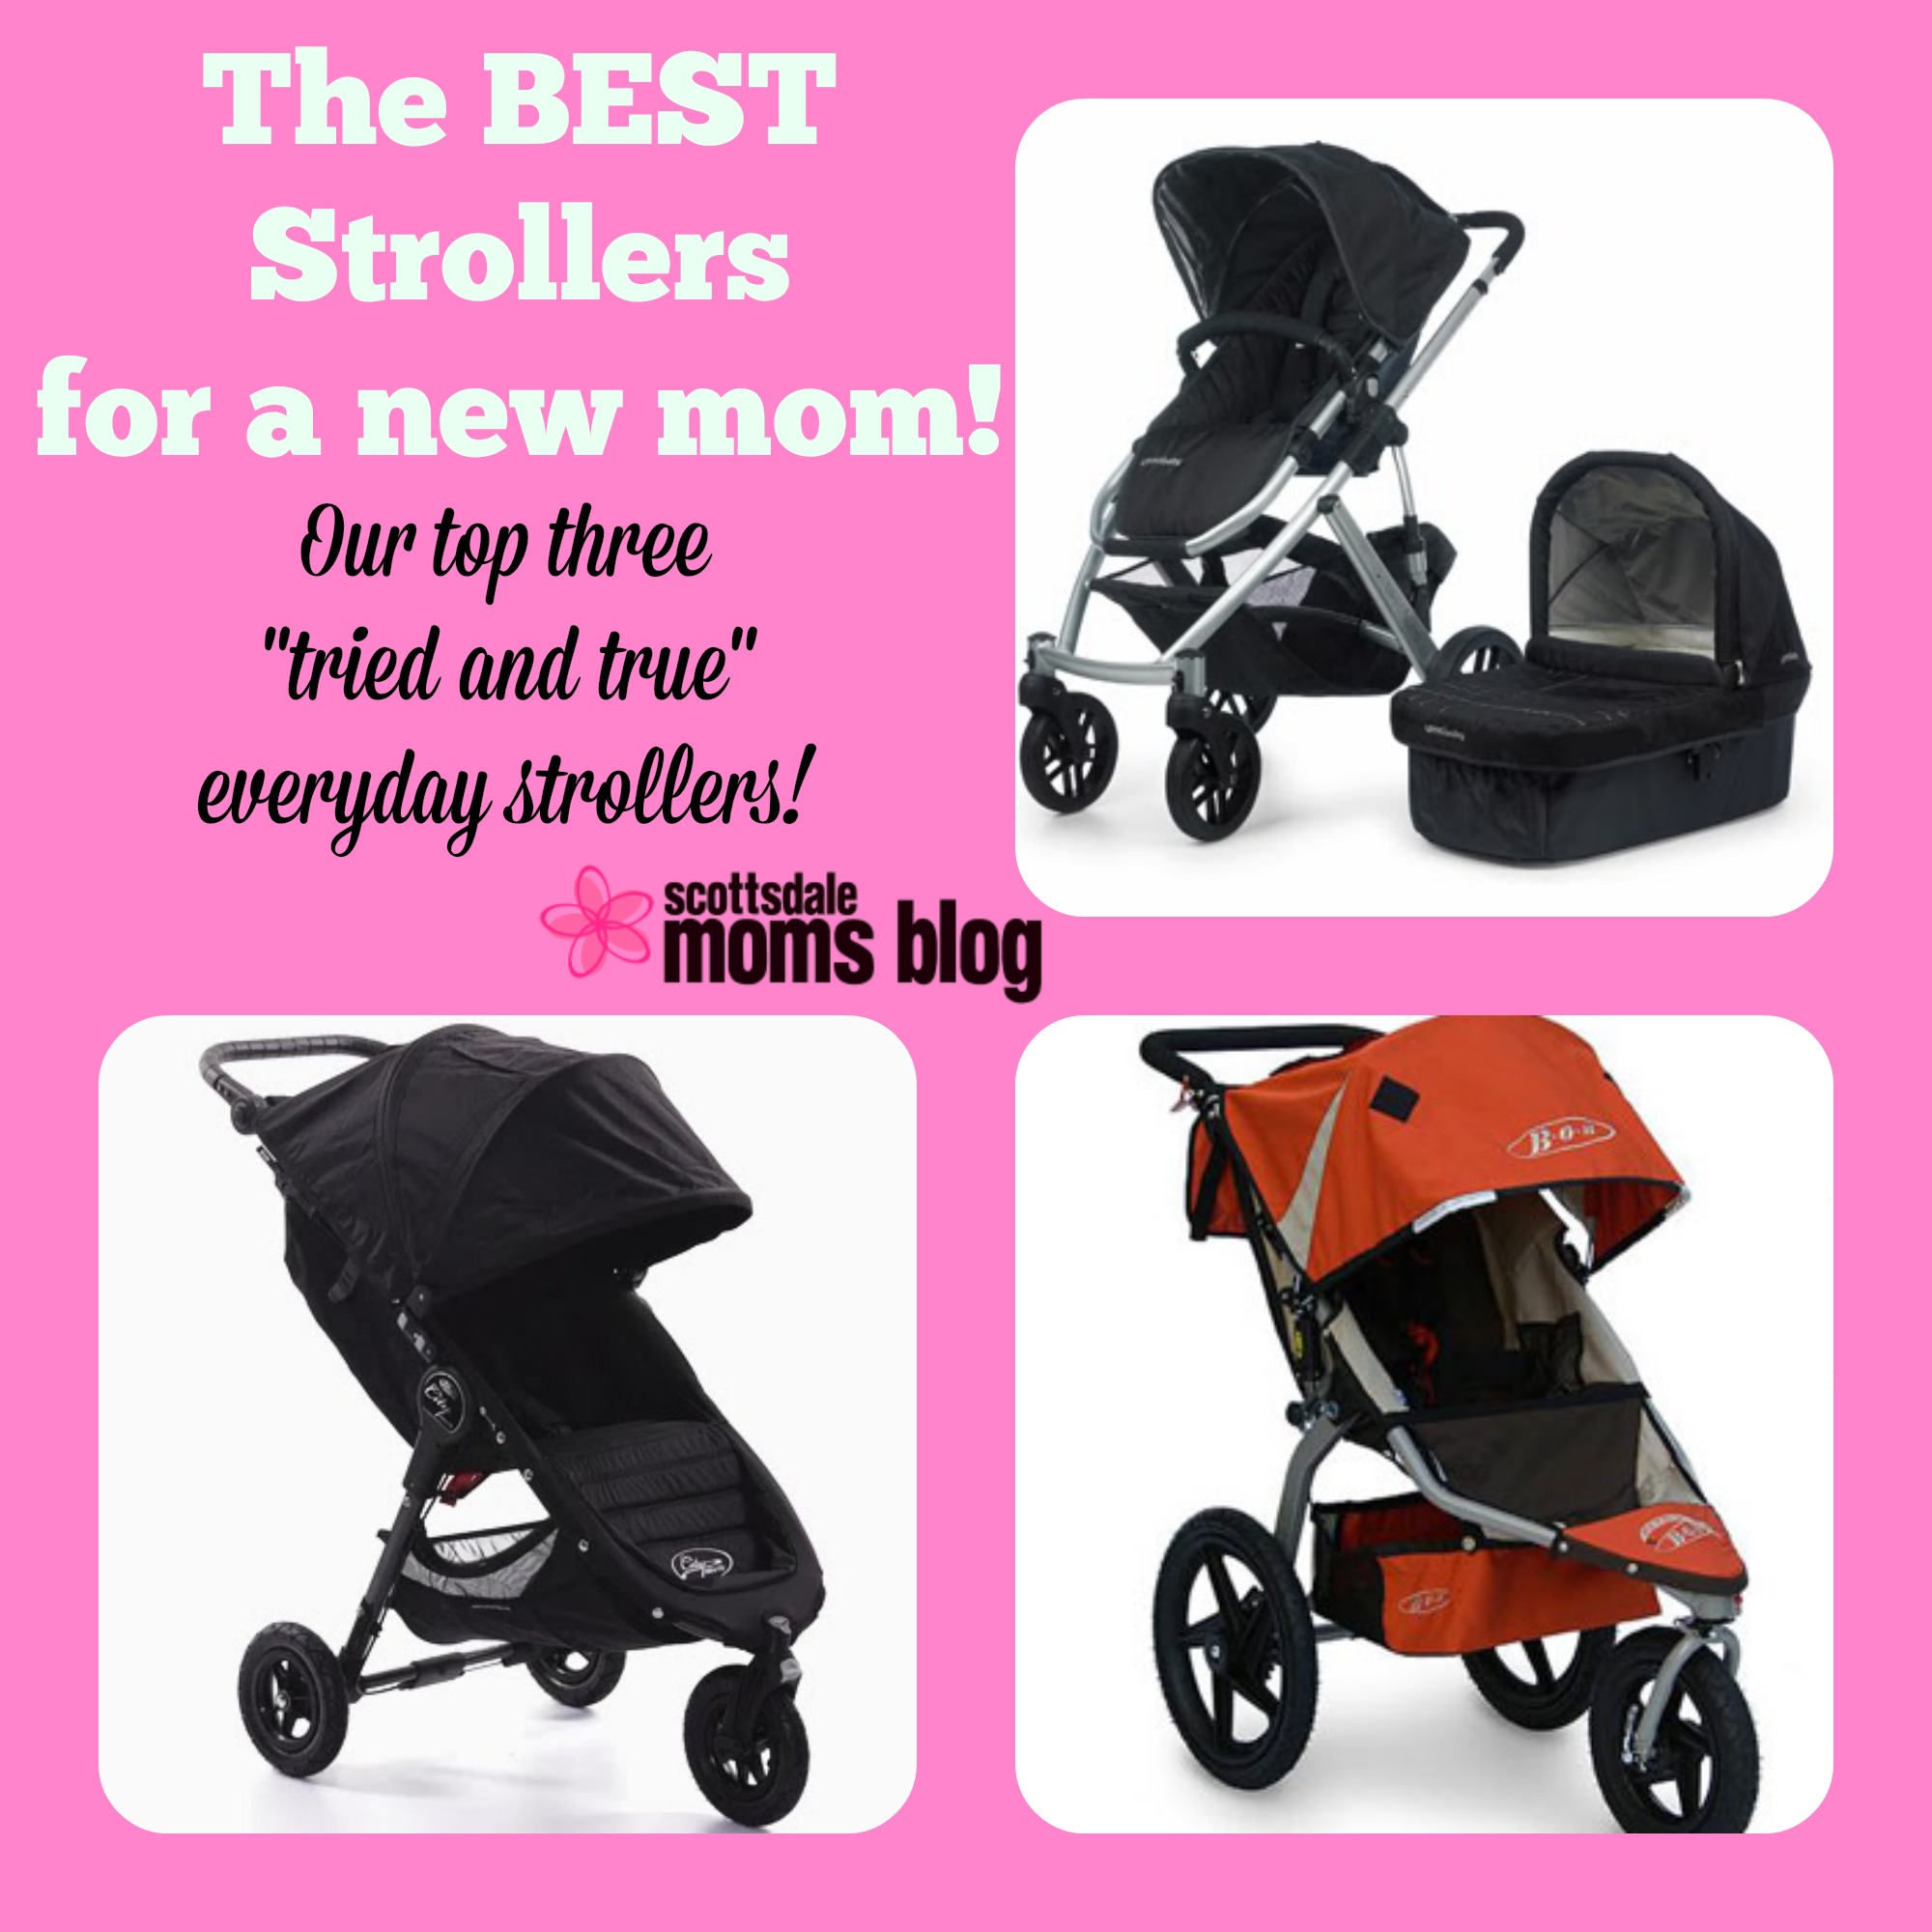 Our top 3 strollers